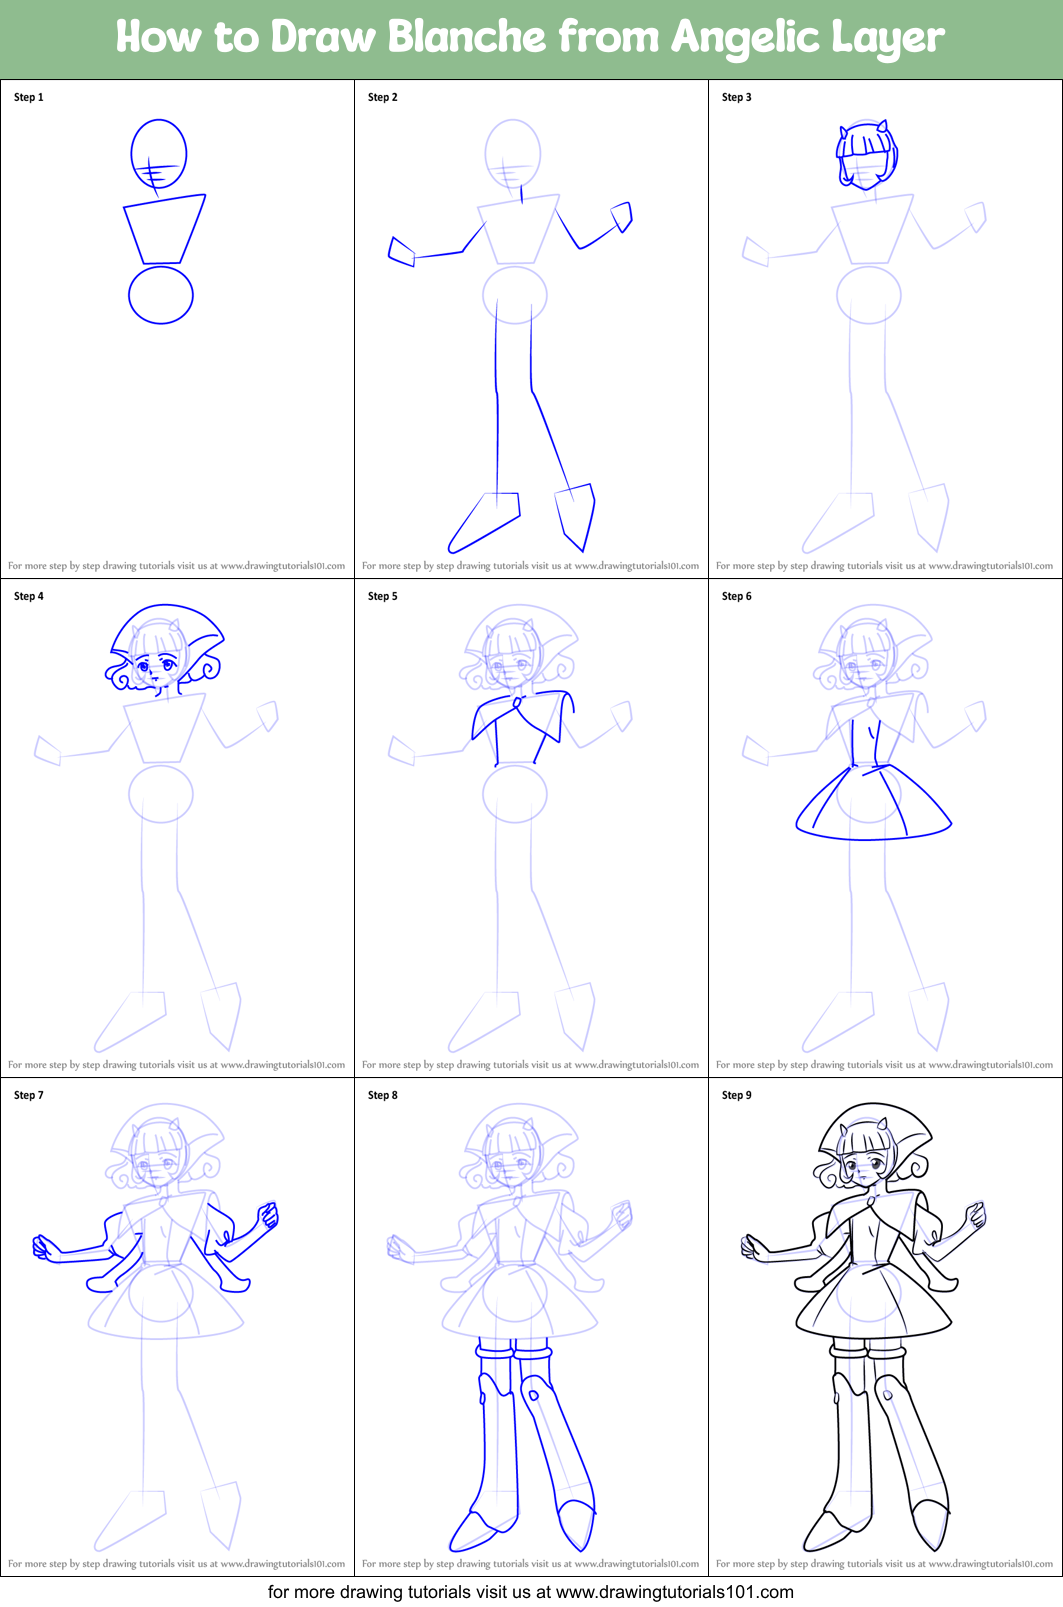 How to Draw Blanche from Angelic Layer printable step by step drawing